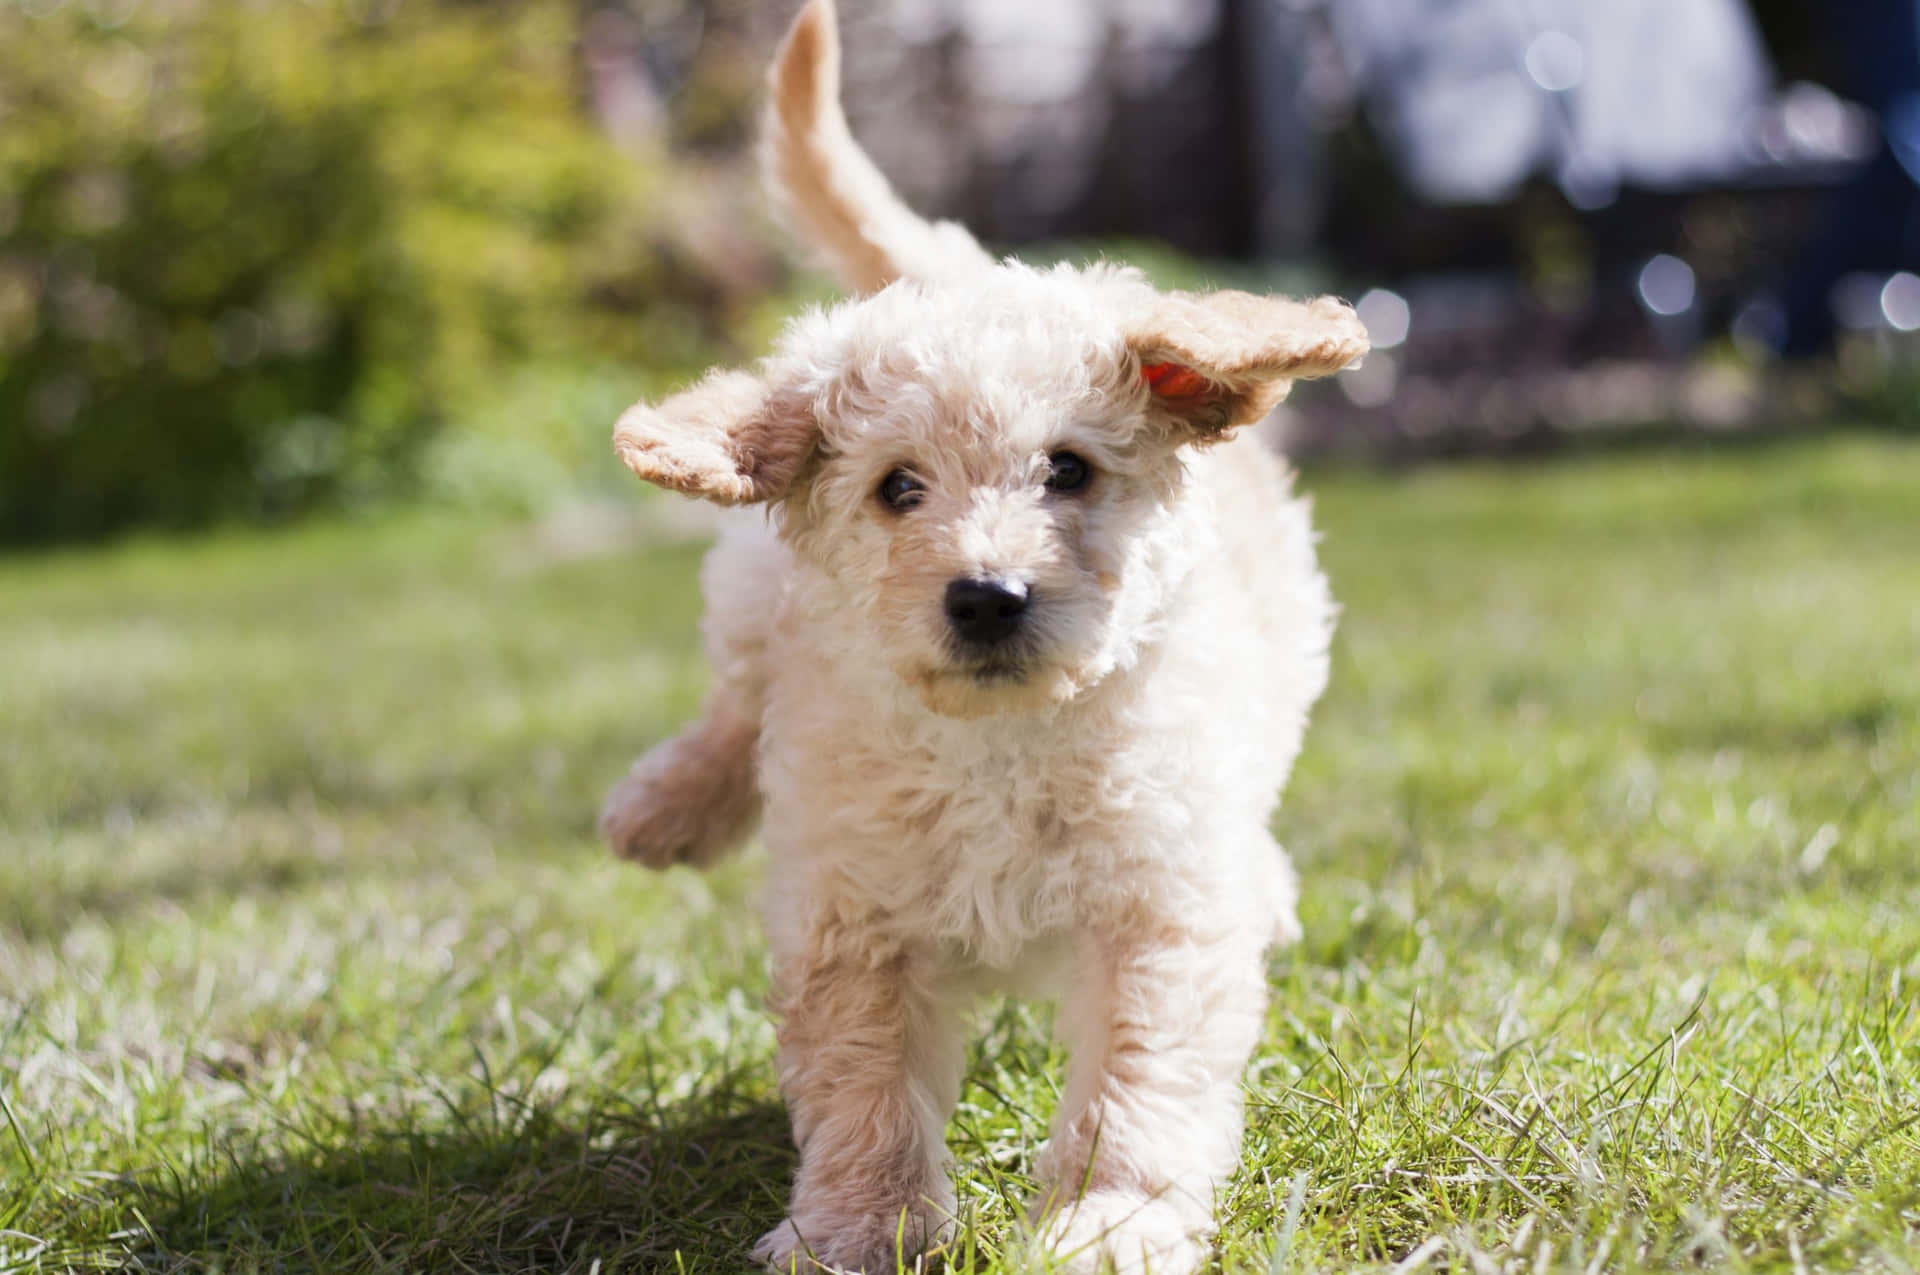 A Small Brown Puppy Running In The Grass